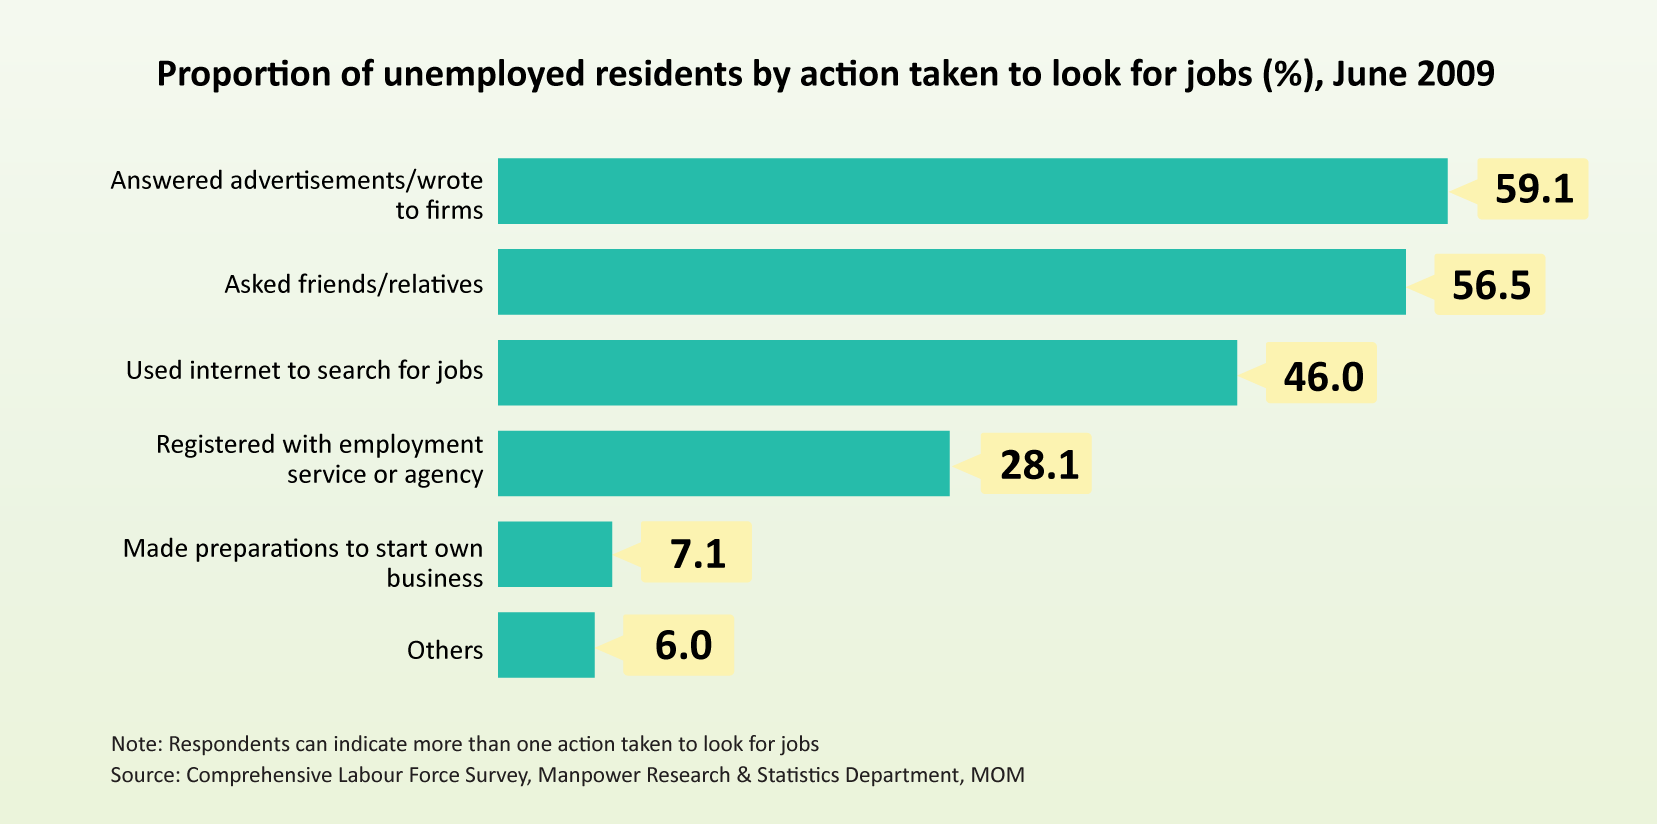 Proportion of unemployed residents by action taken to look for jobs (%), June 2009